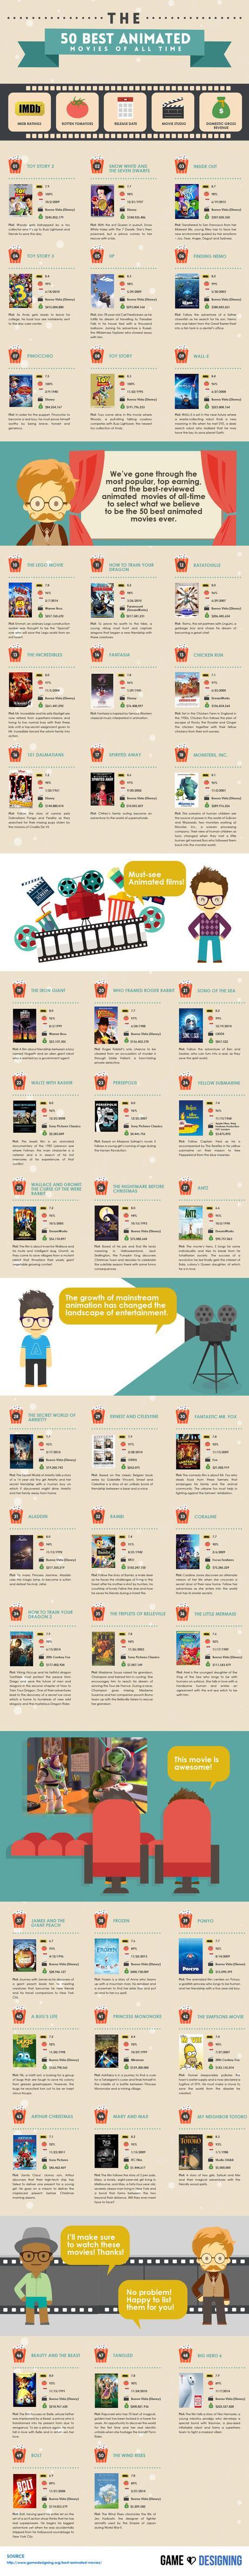 50 Best Rated Animated Films Infographic